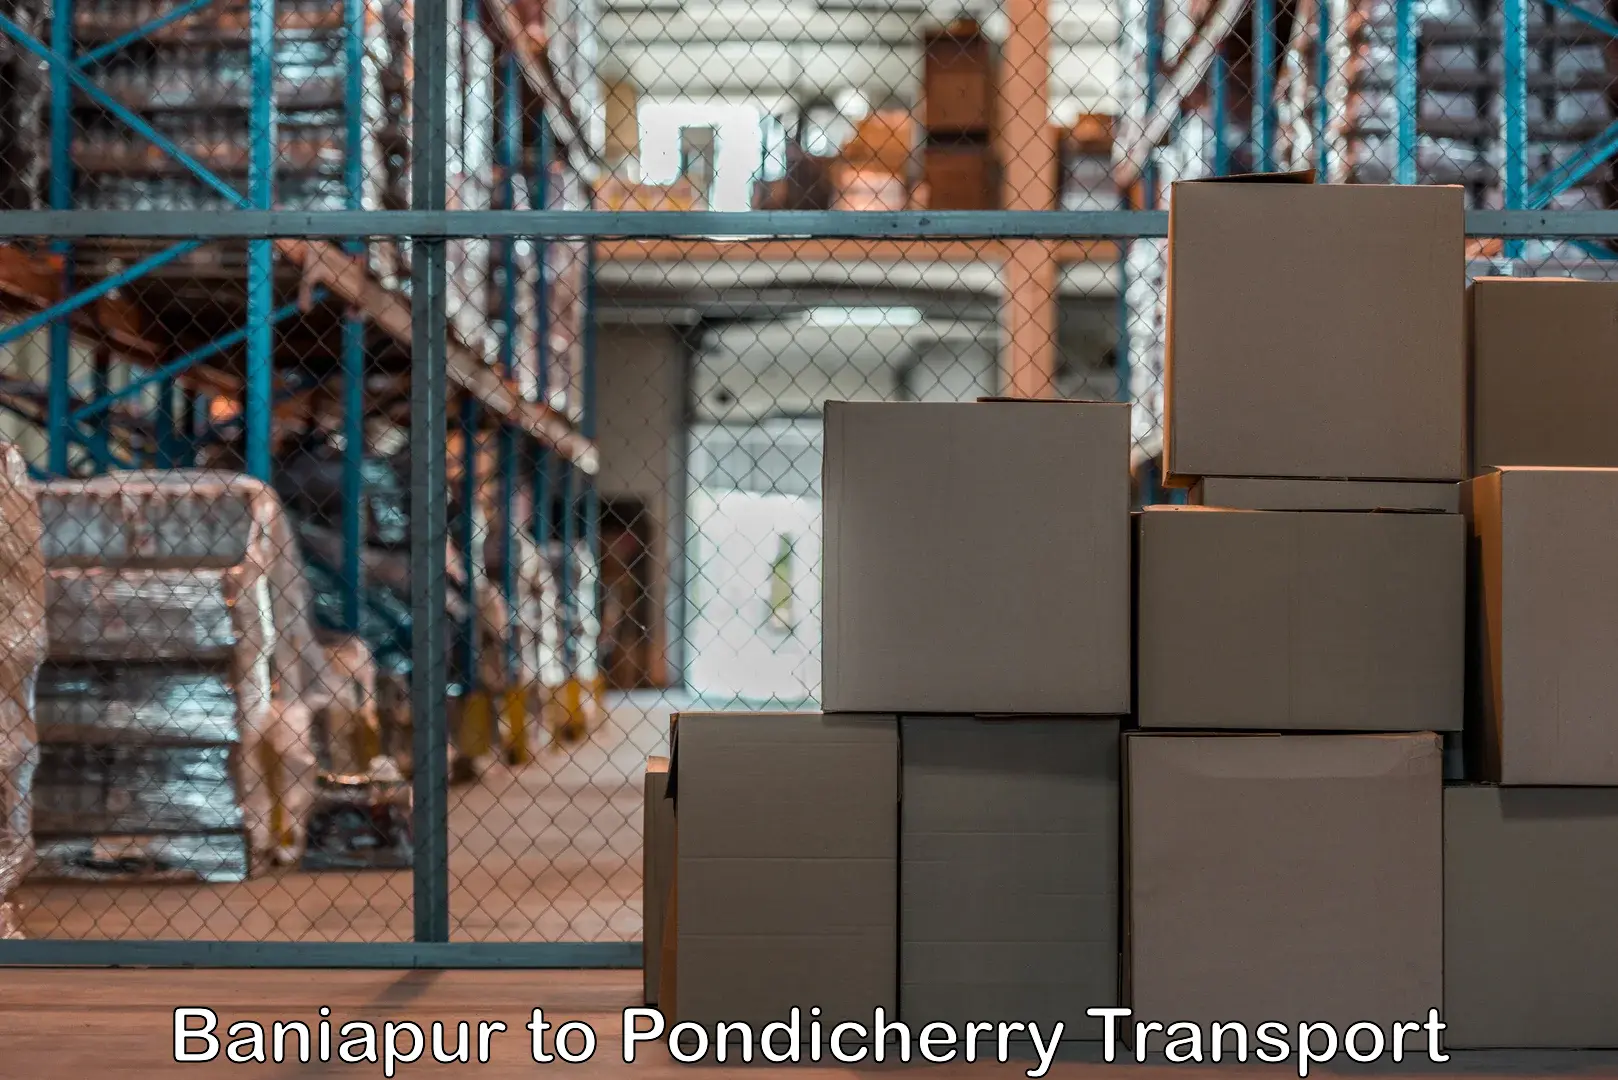 Daily parcel service transport in Baniapur to Metttupalayam